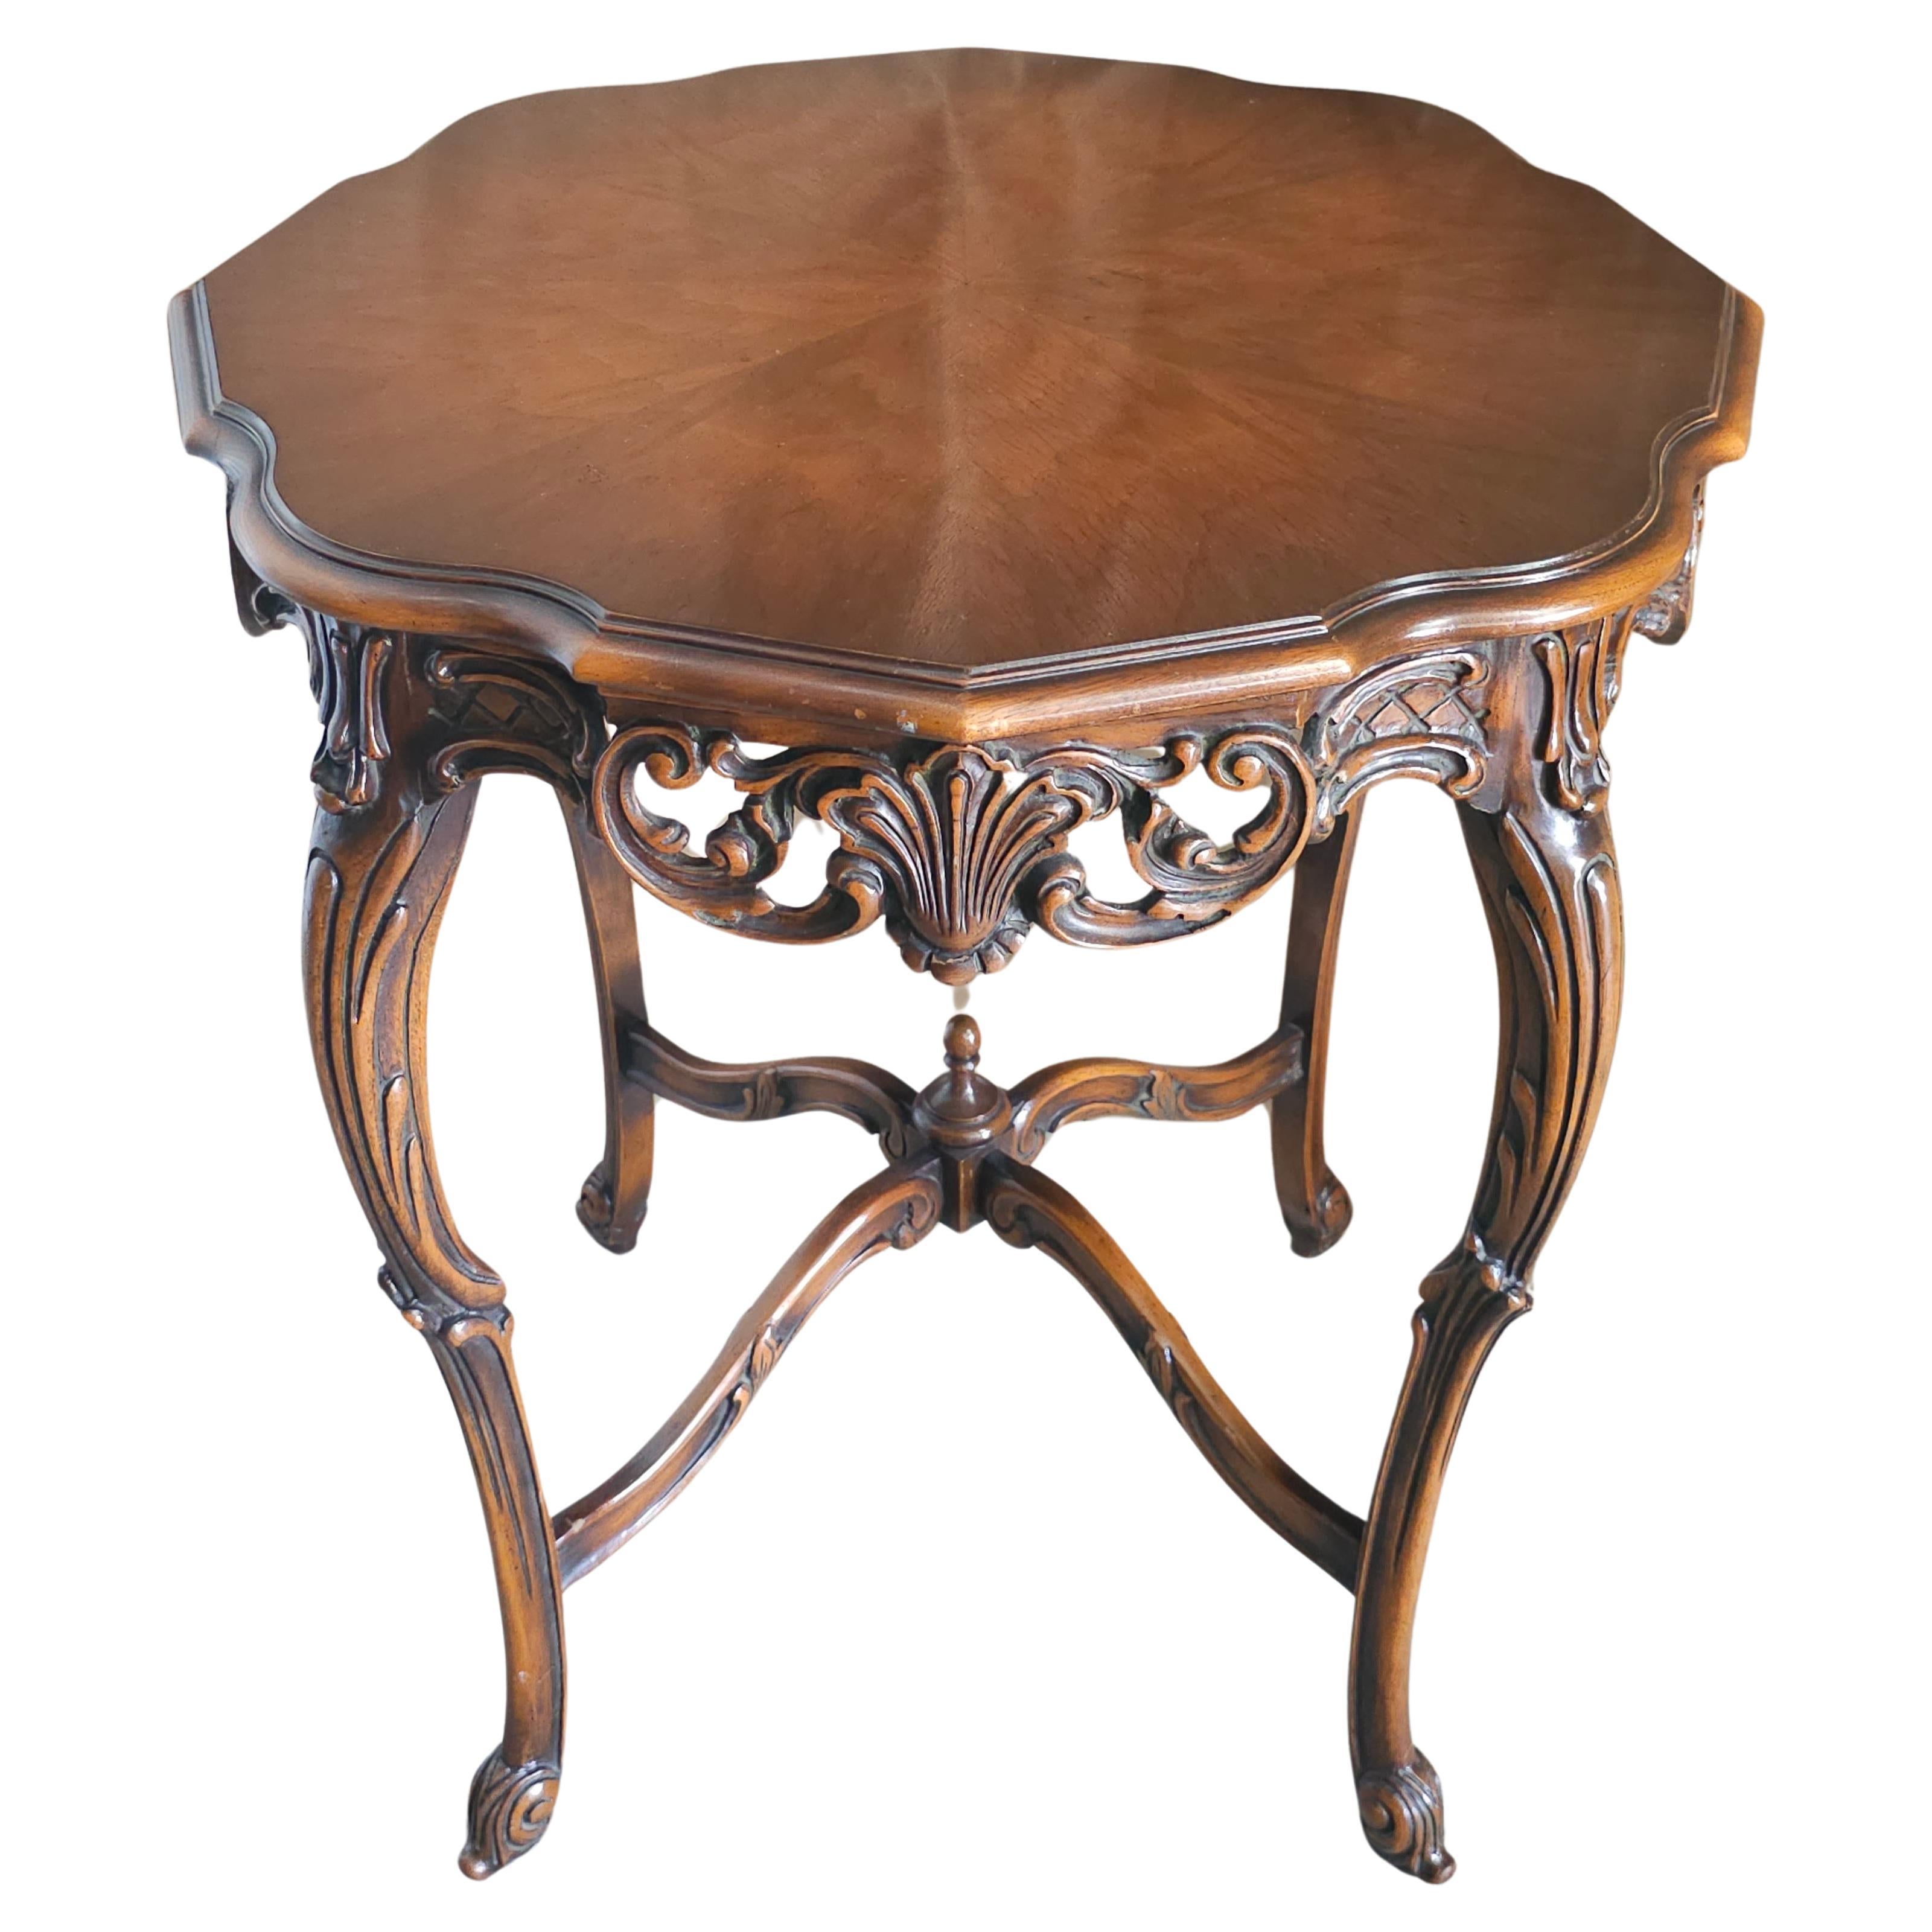 20th Century Louis XV Provincial Style Carved Walnut Gueridon Table For Sale